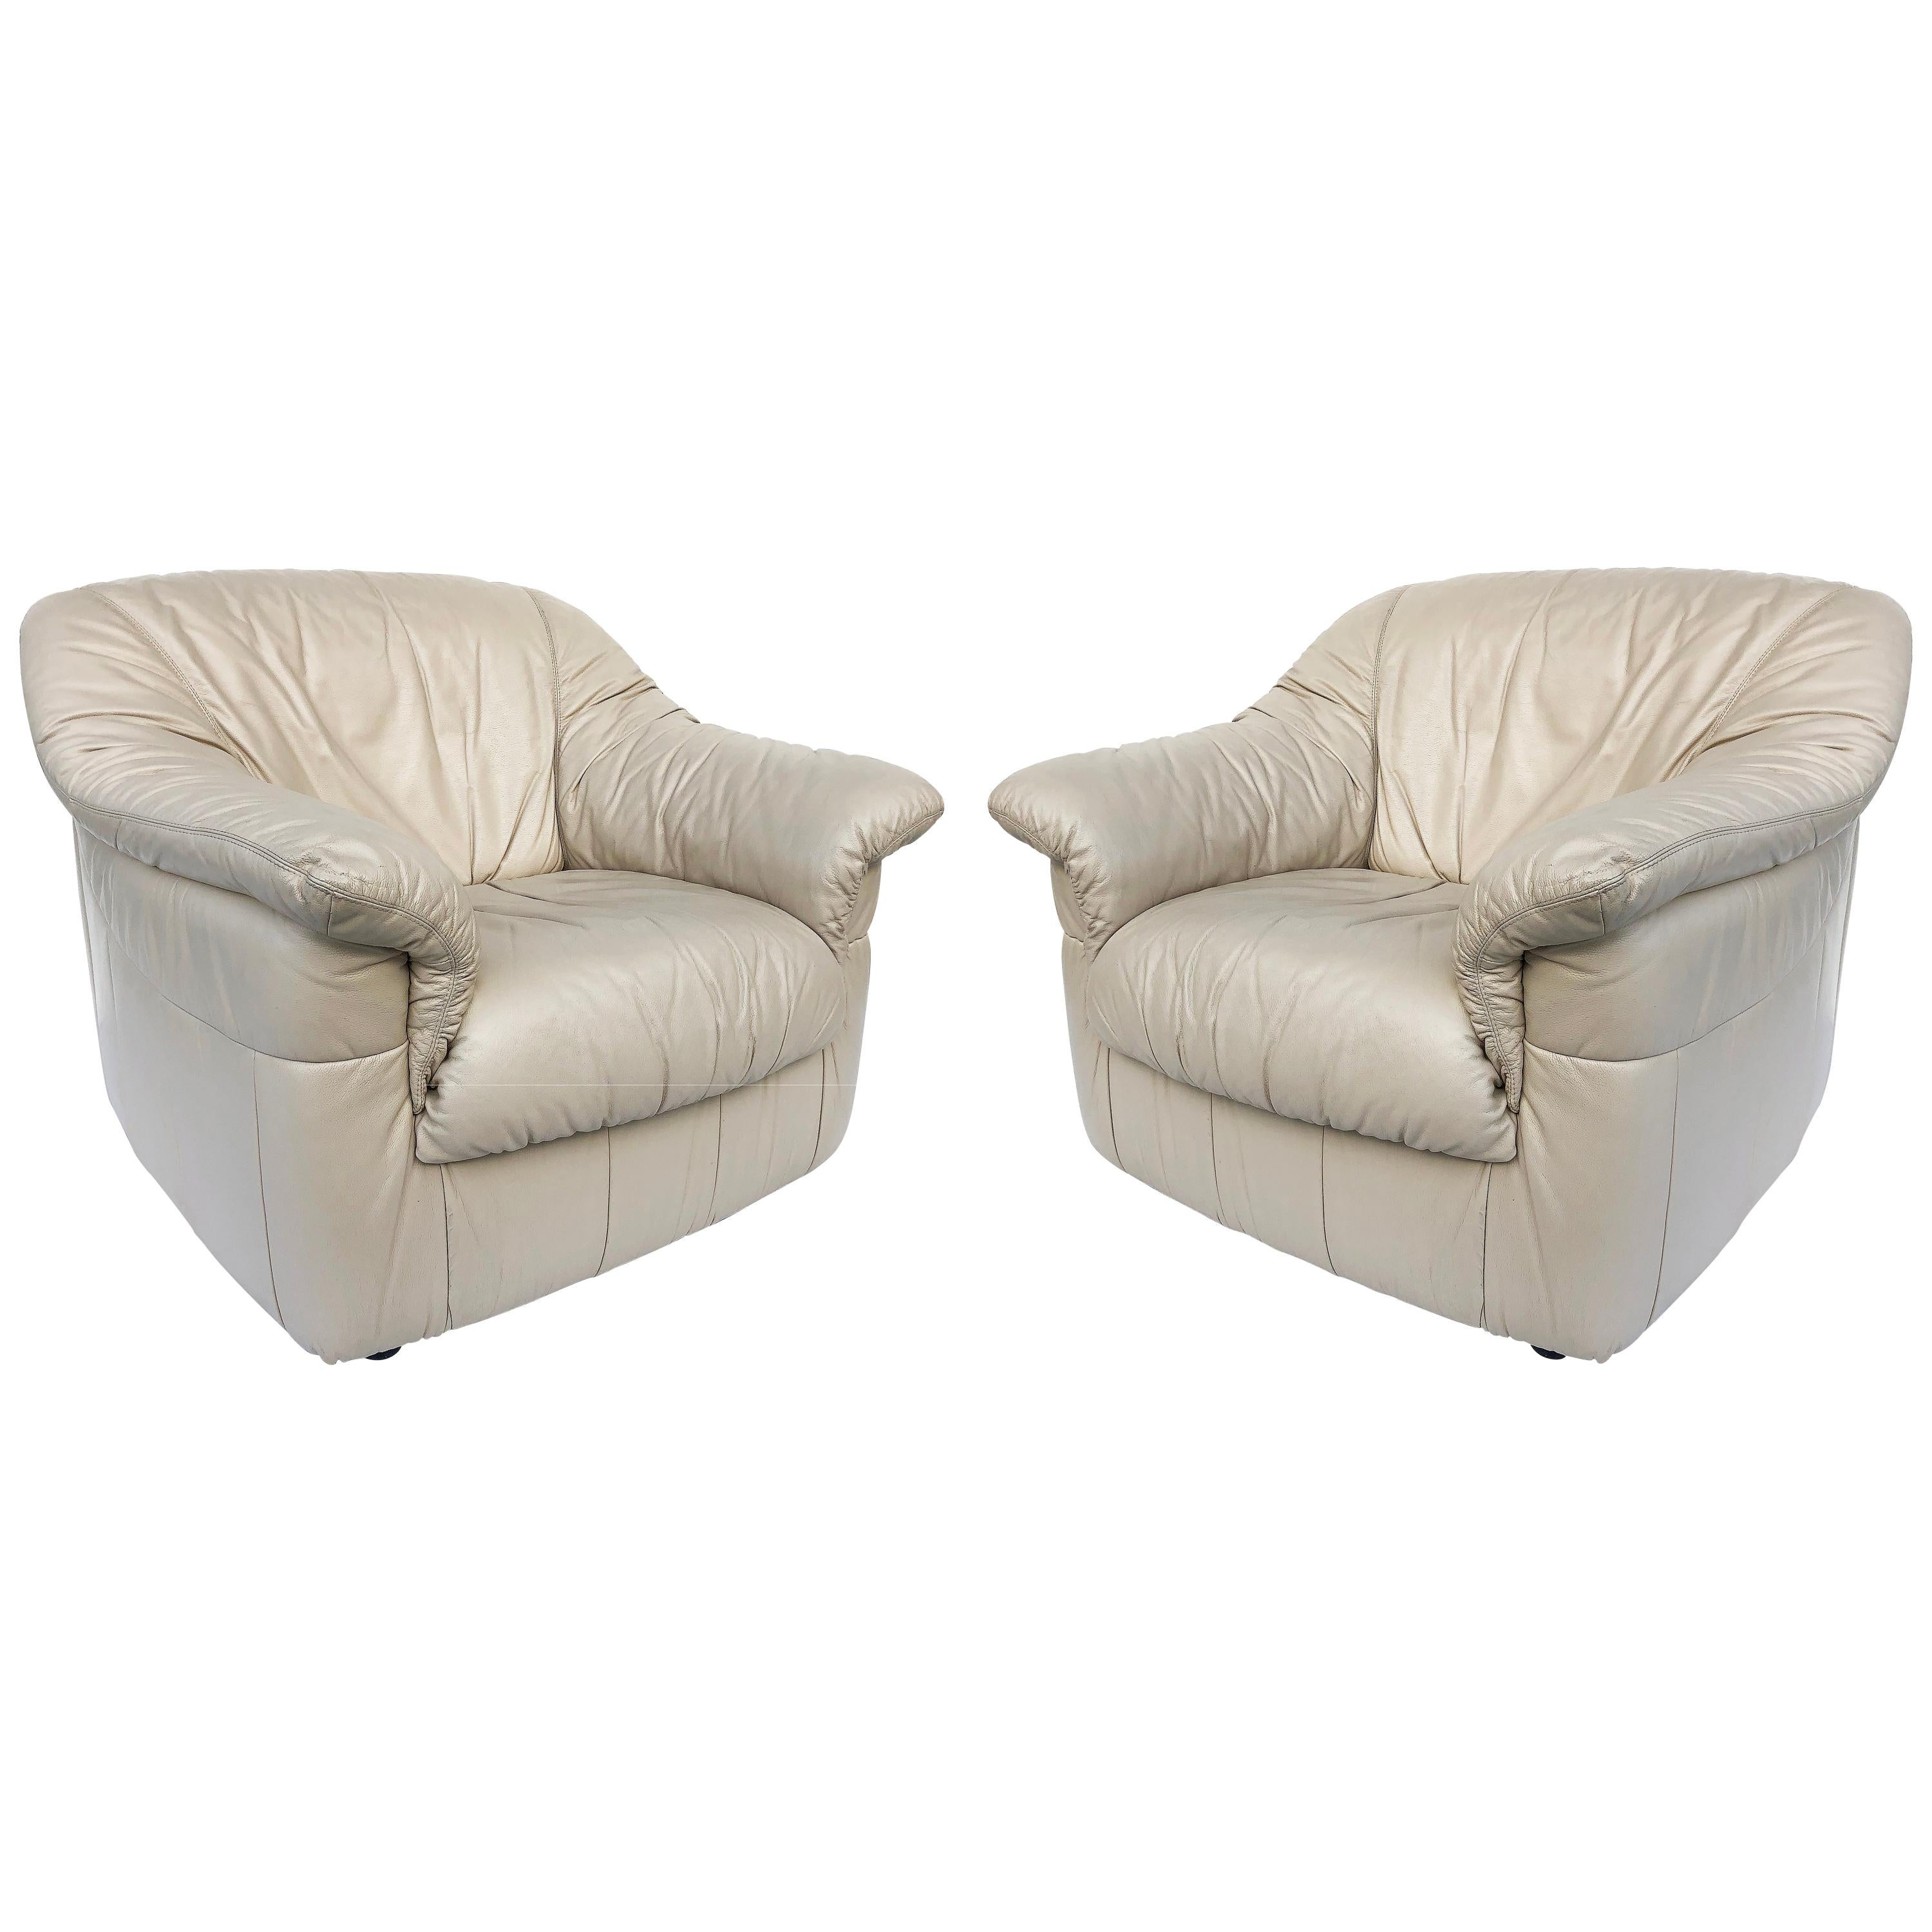 1980s Vintage Overscale Leather Club Lounge Chairs, a Pair